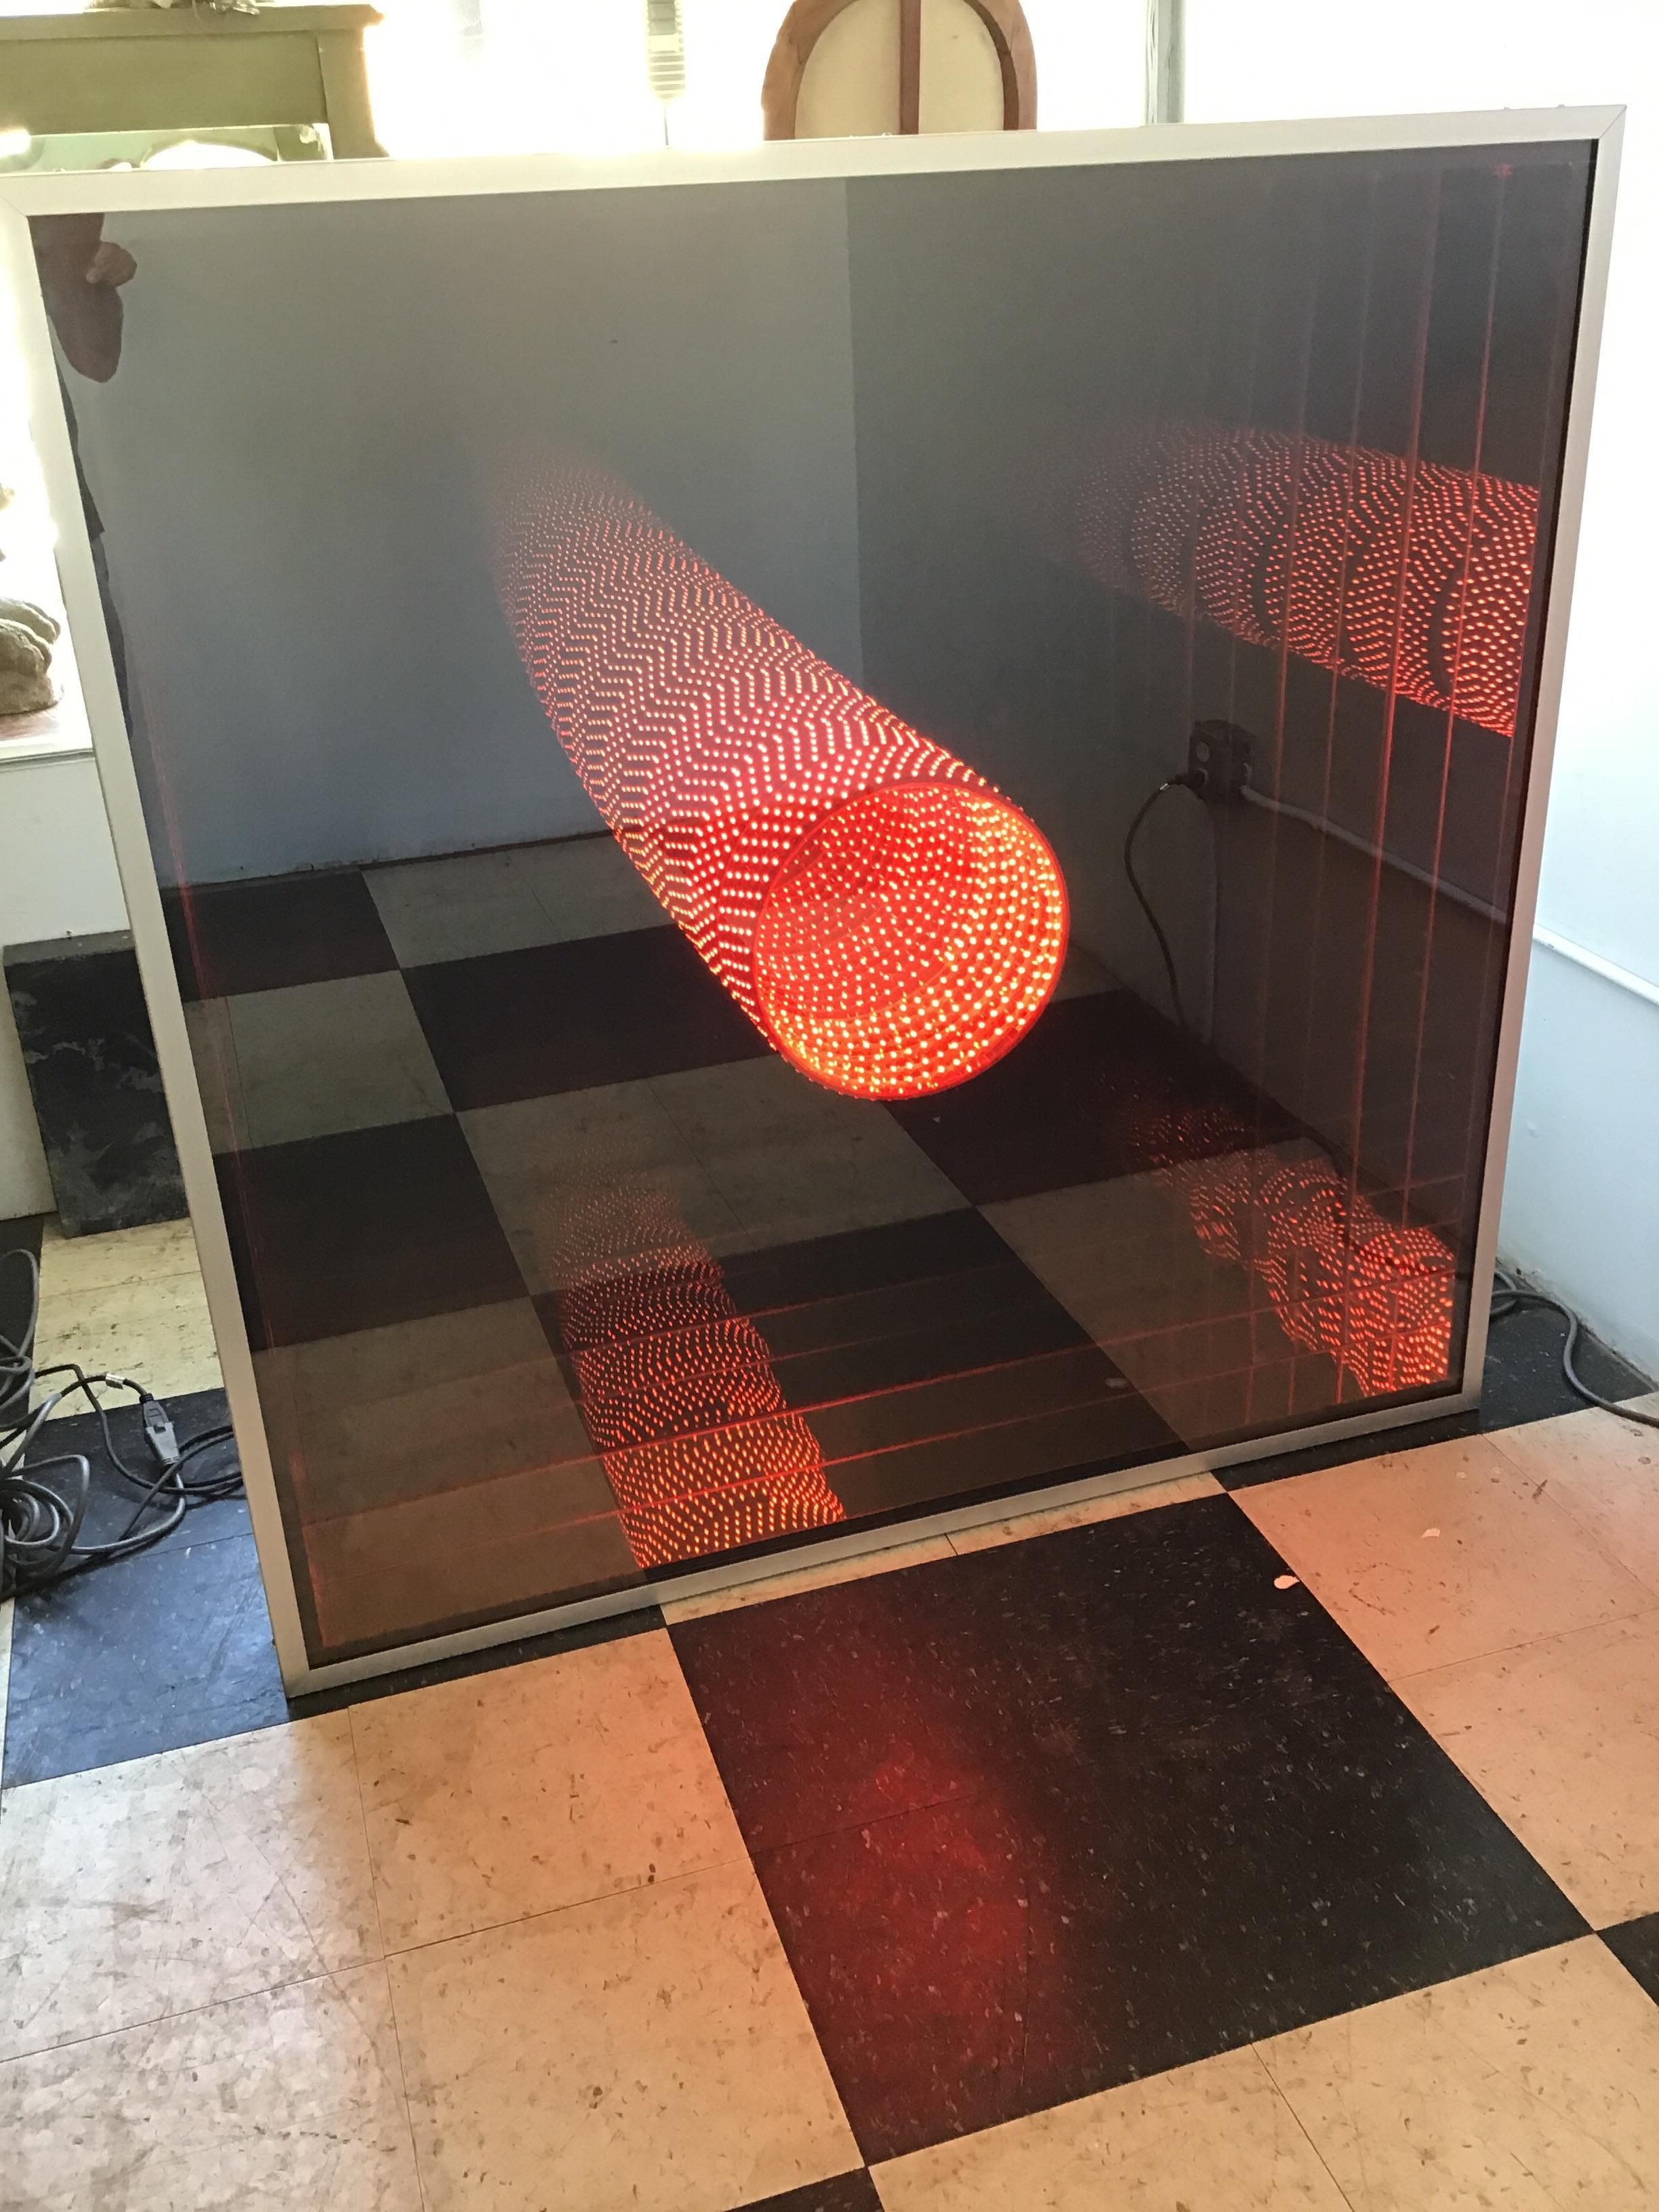 Very large 1980s infinity mirror from an East Hampton estate. Hard to show how cool this item is through the pictures.